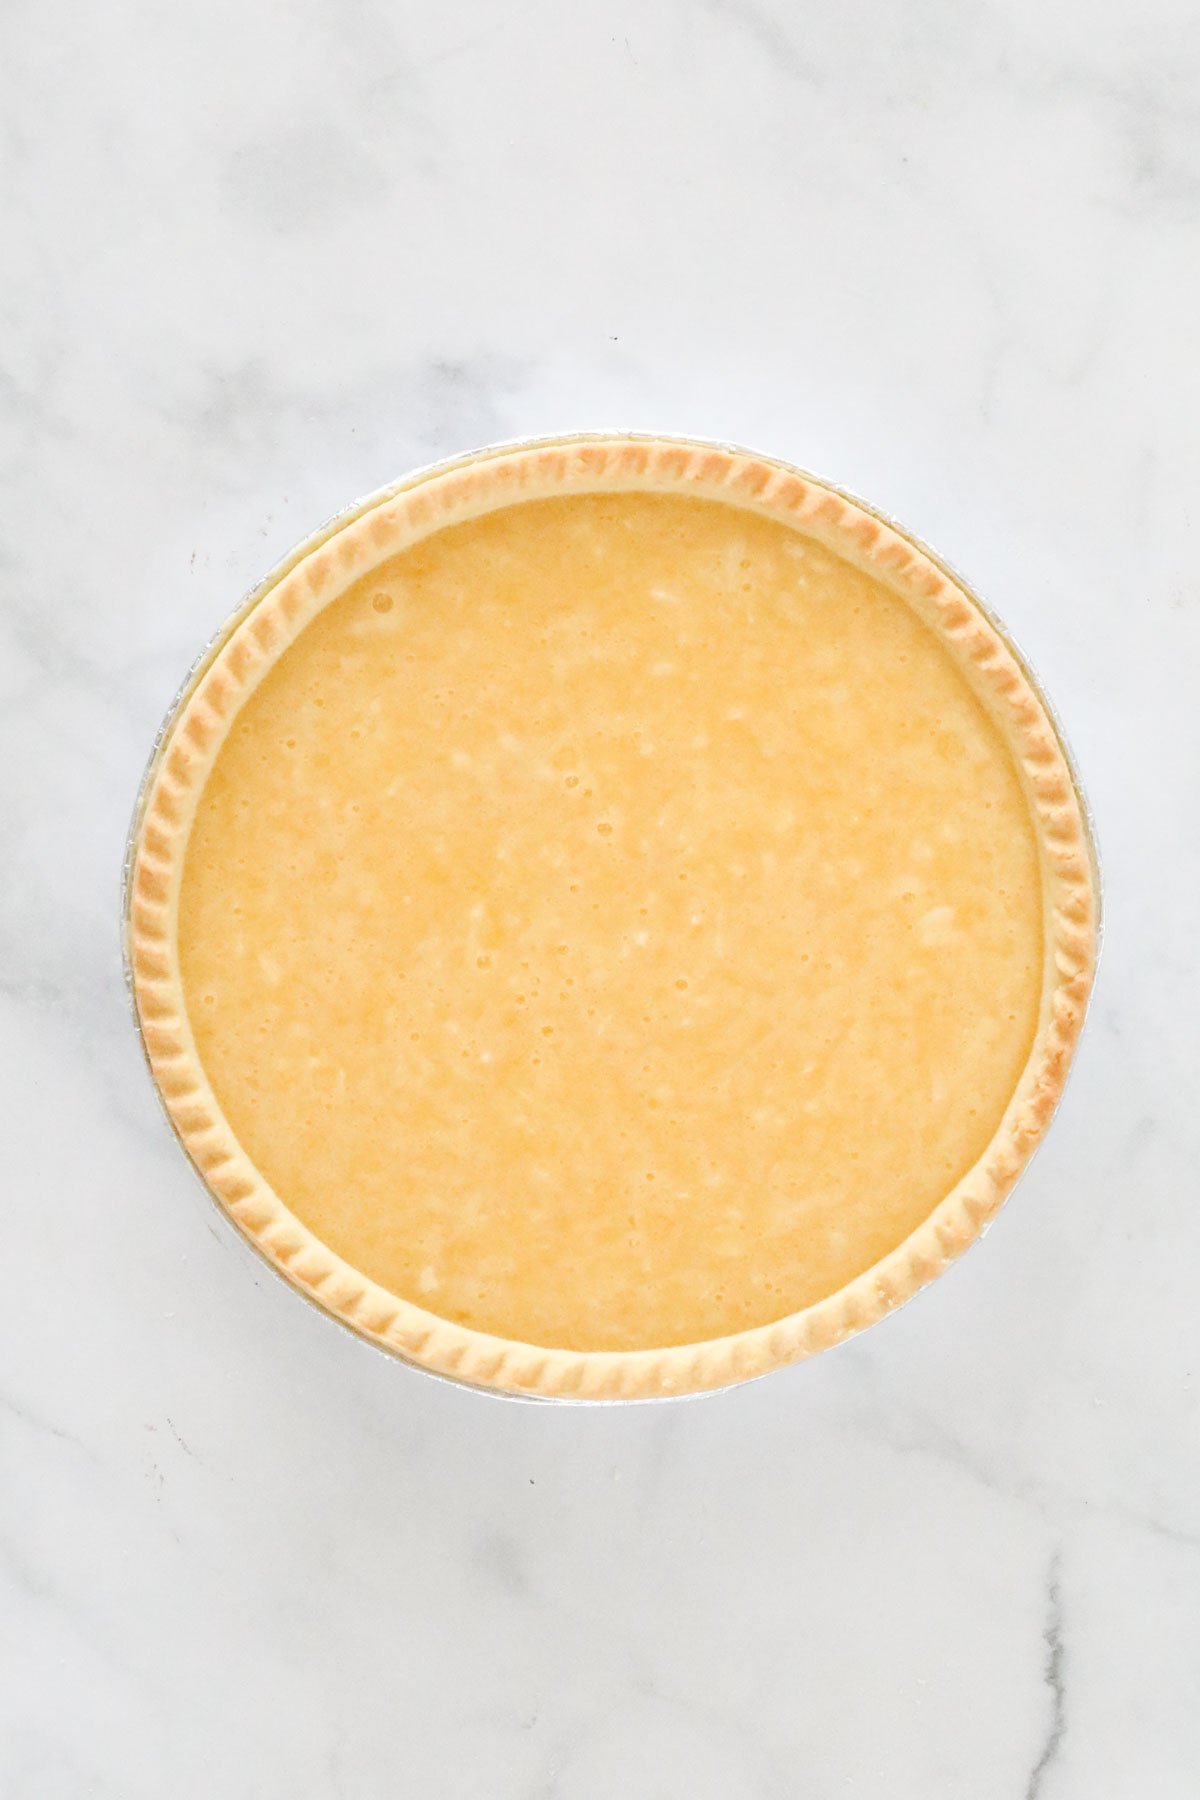 Egg and coconut filling poured into a pre-bought shortcrust pastry shell.